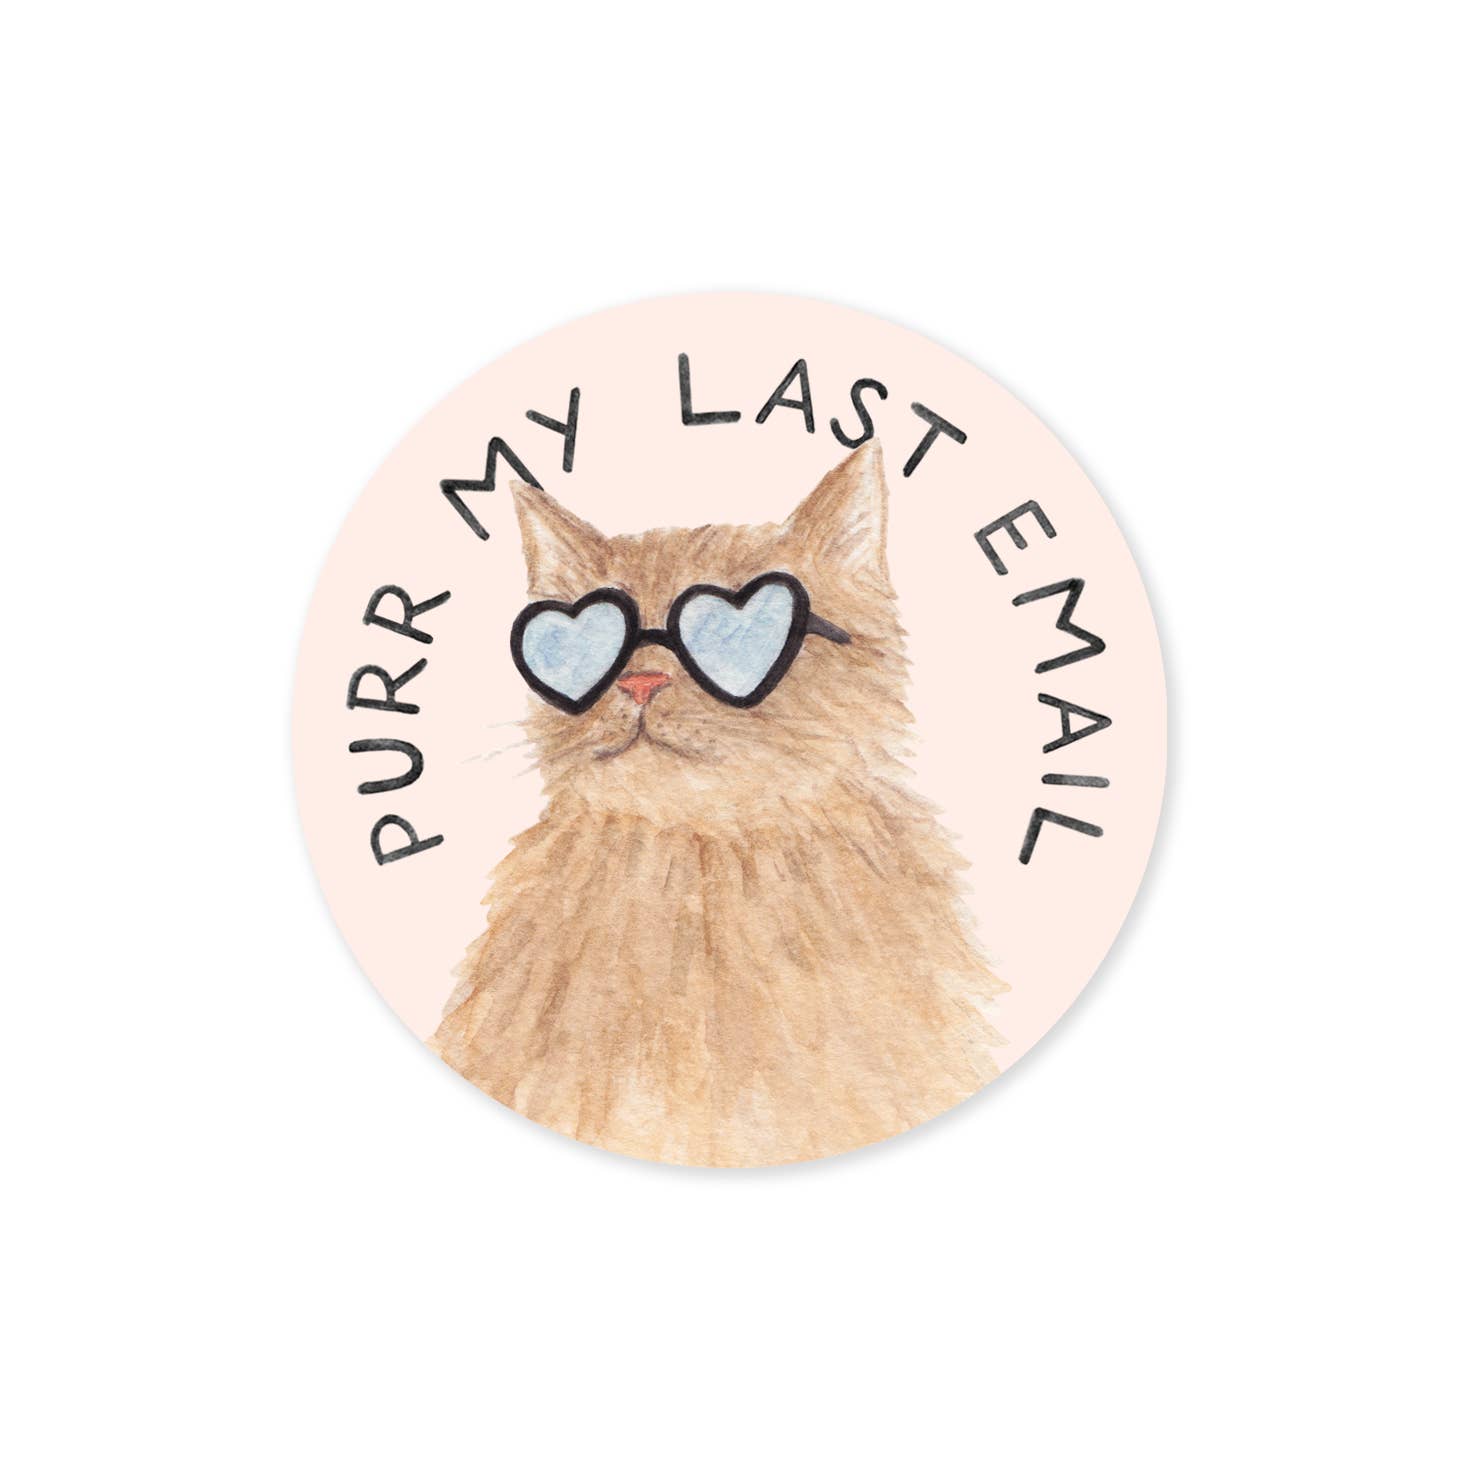 Pink background with image of a yellow cat wearing heart shaped glasses and black text says, "Purr my last email". 